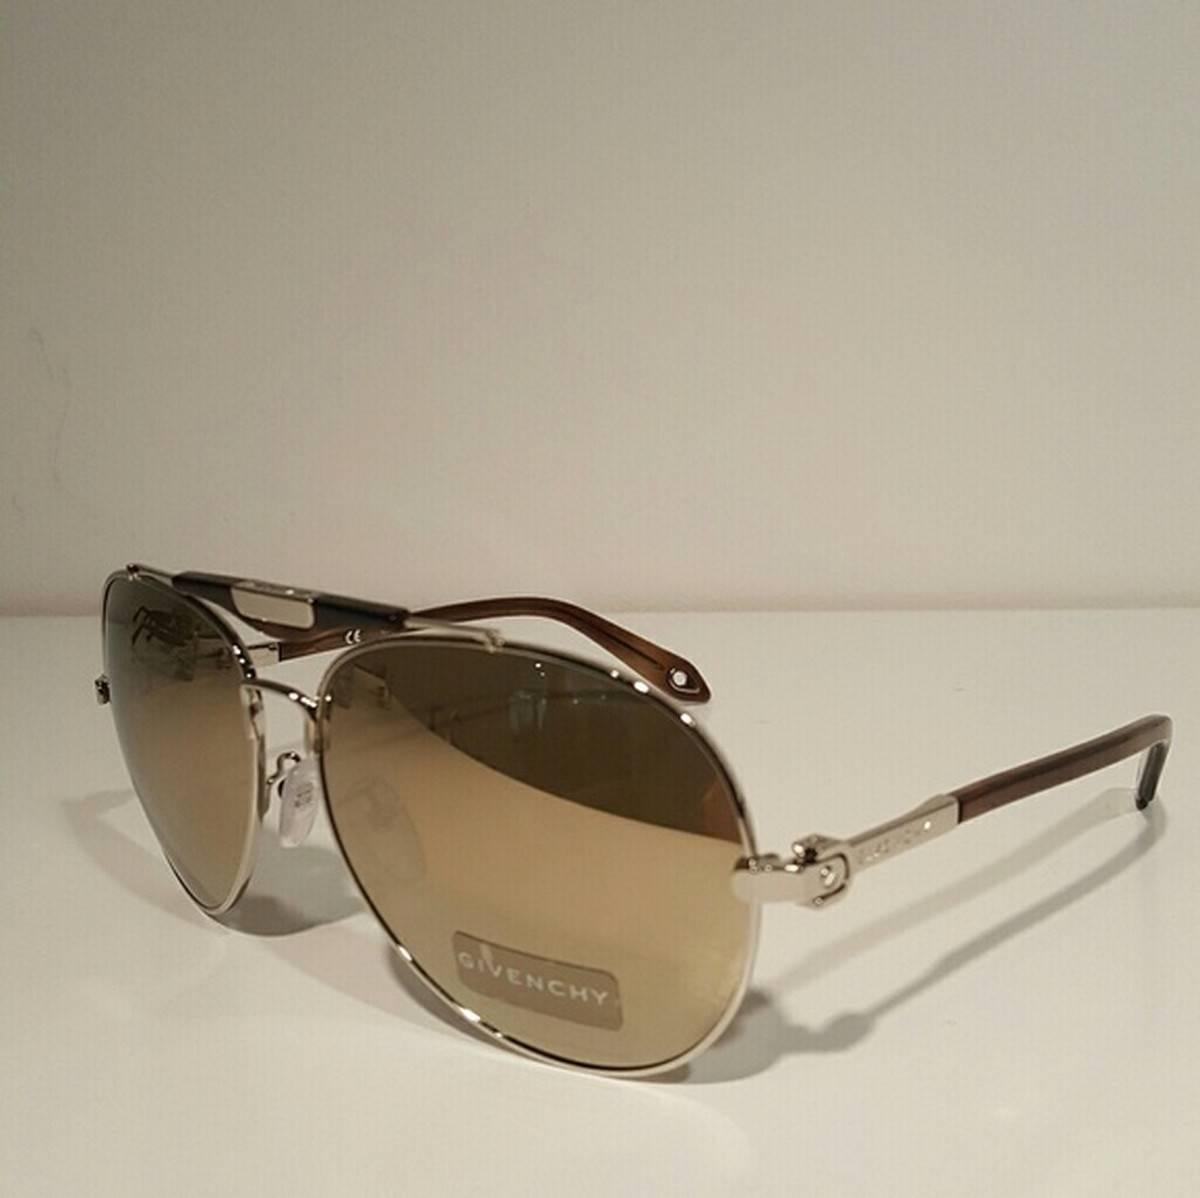 Givenchy Mirrored Gold Aviator Sunglasses
Color: Gold
Size: OS

Brand new with box.
Unused condition.
No flaws.
Made in Italy.